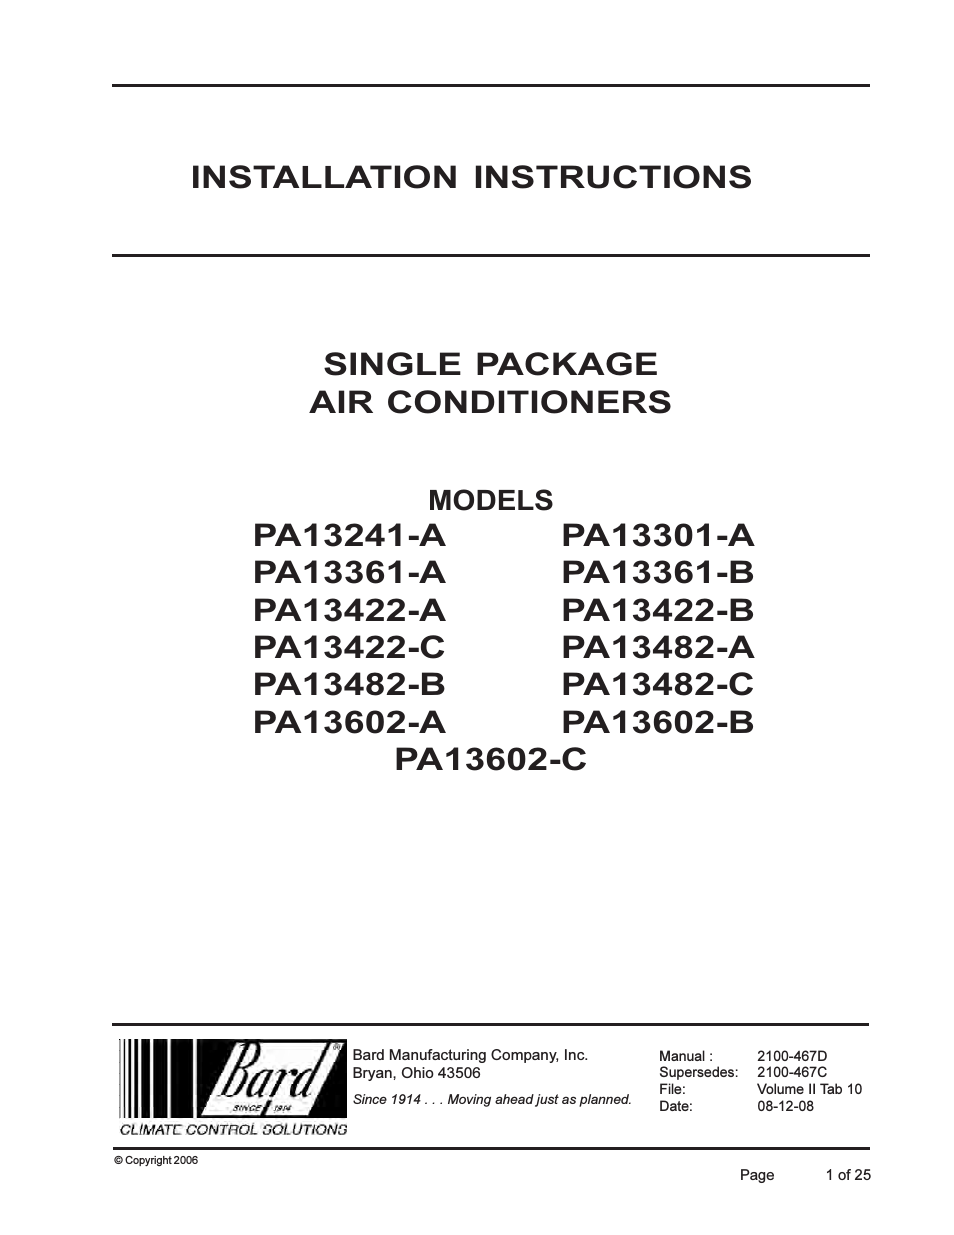 Single Package Air Conditioners PA13602-A